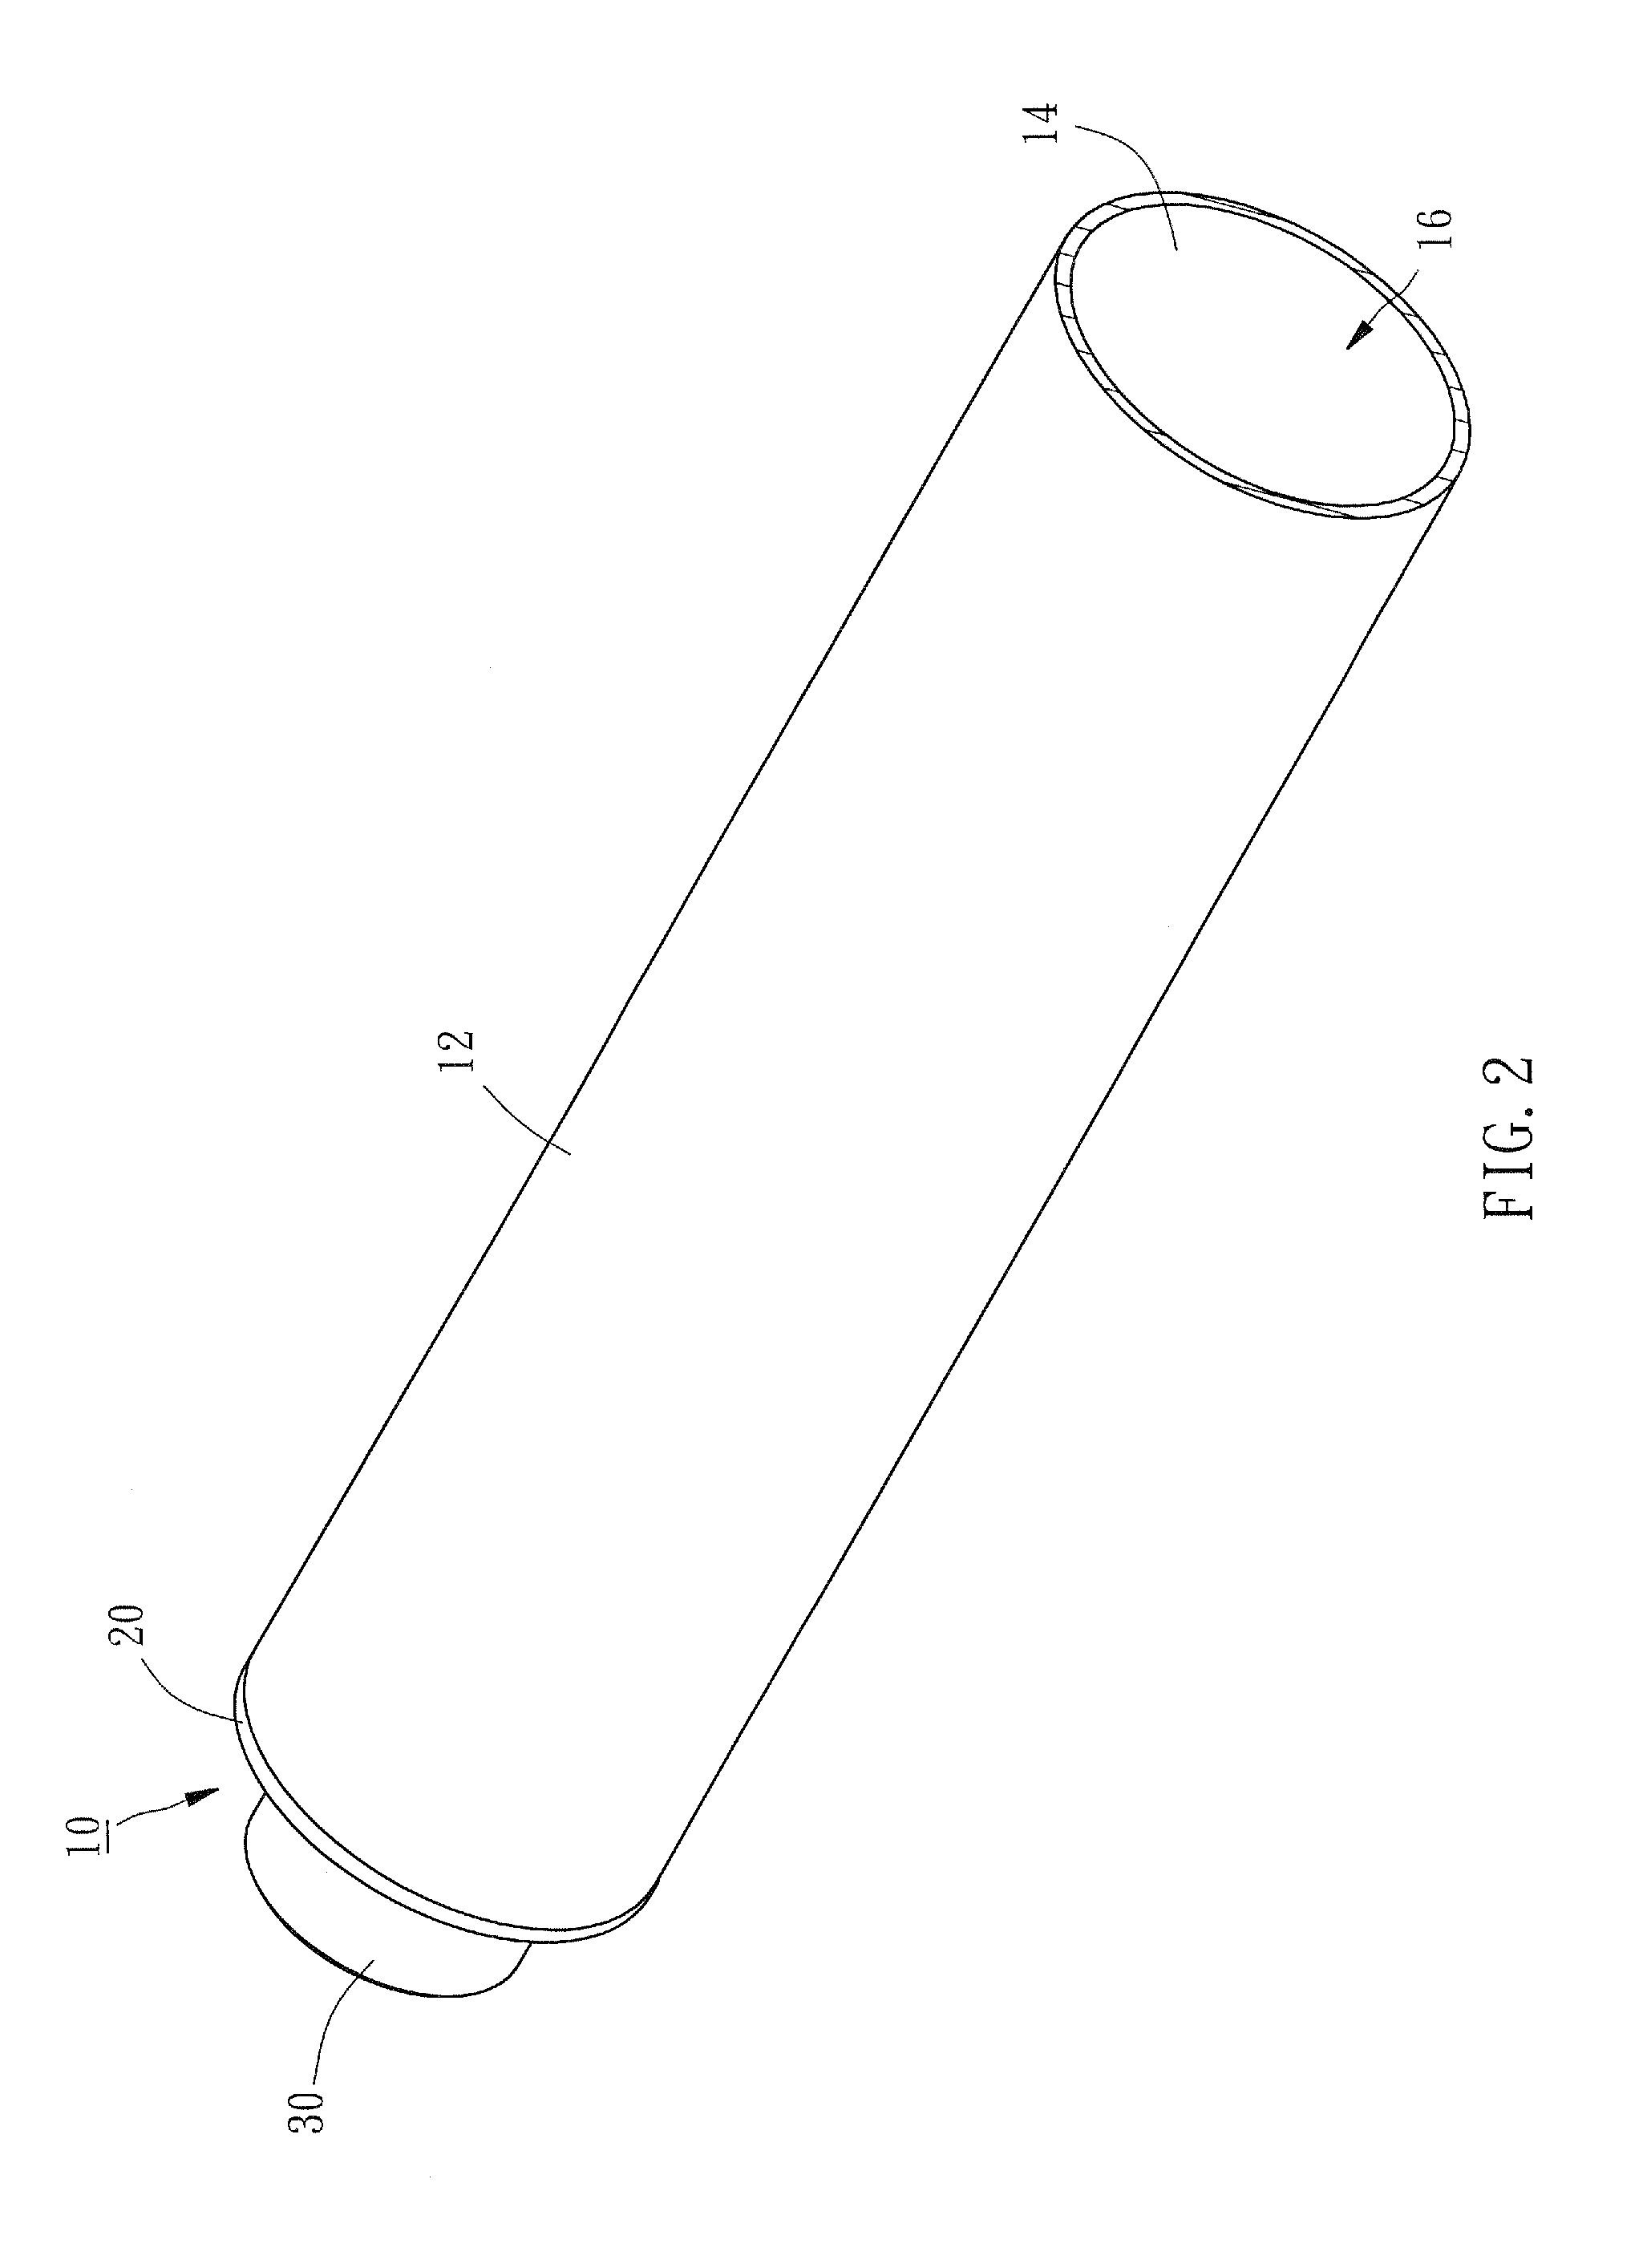 Supporting apparatus for a photosensitive drum